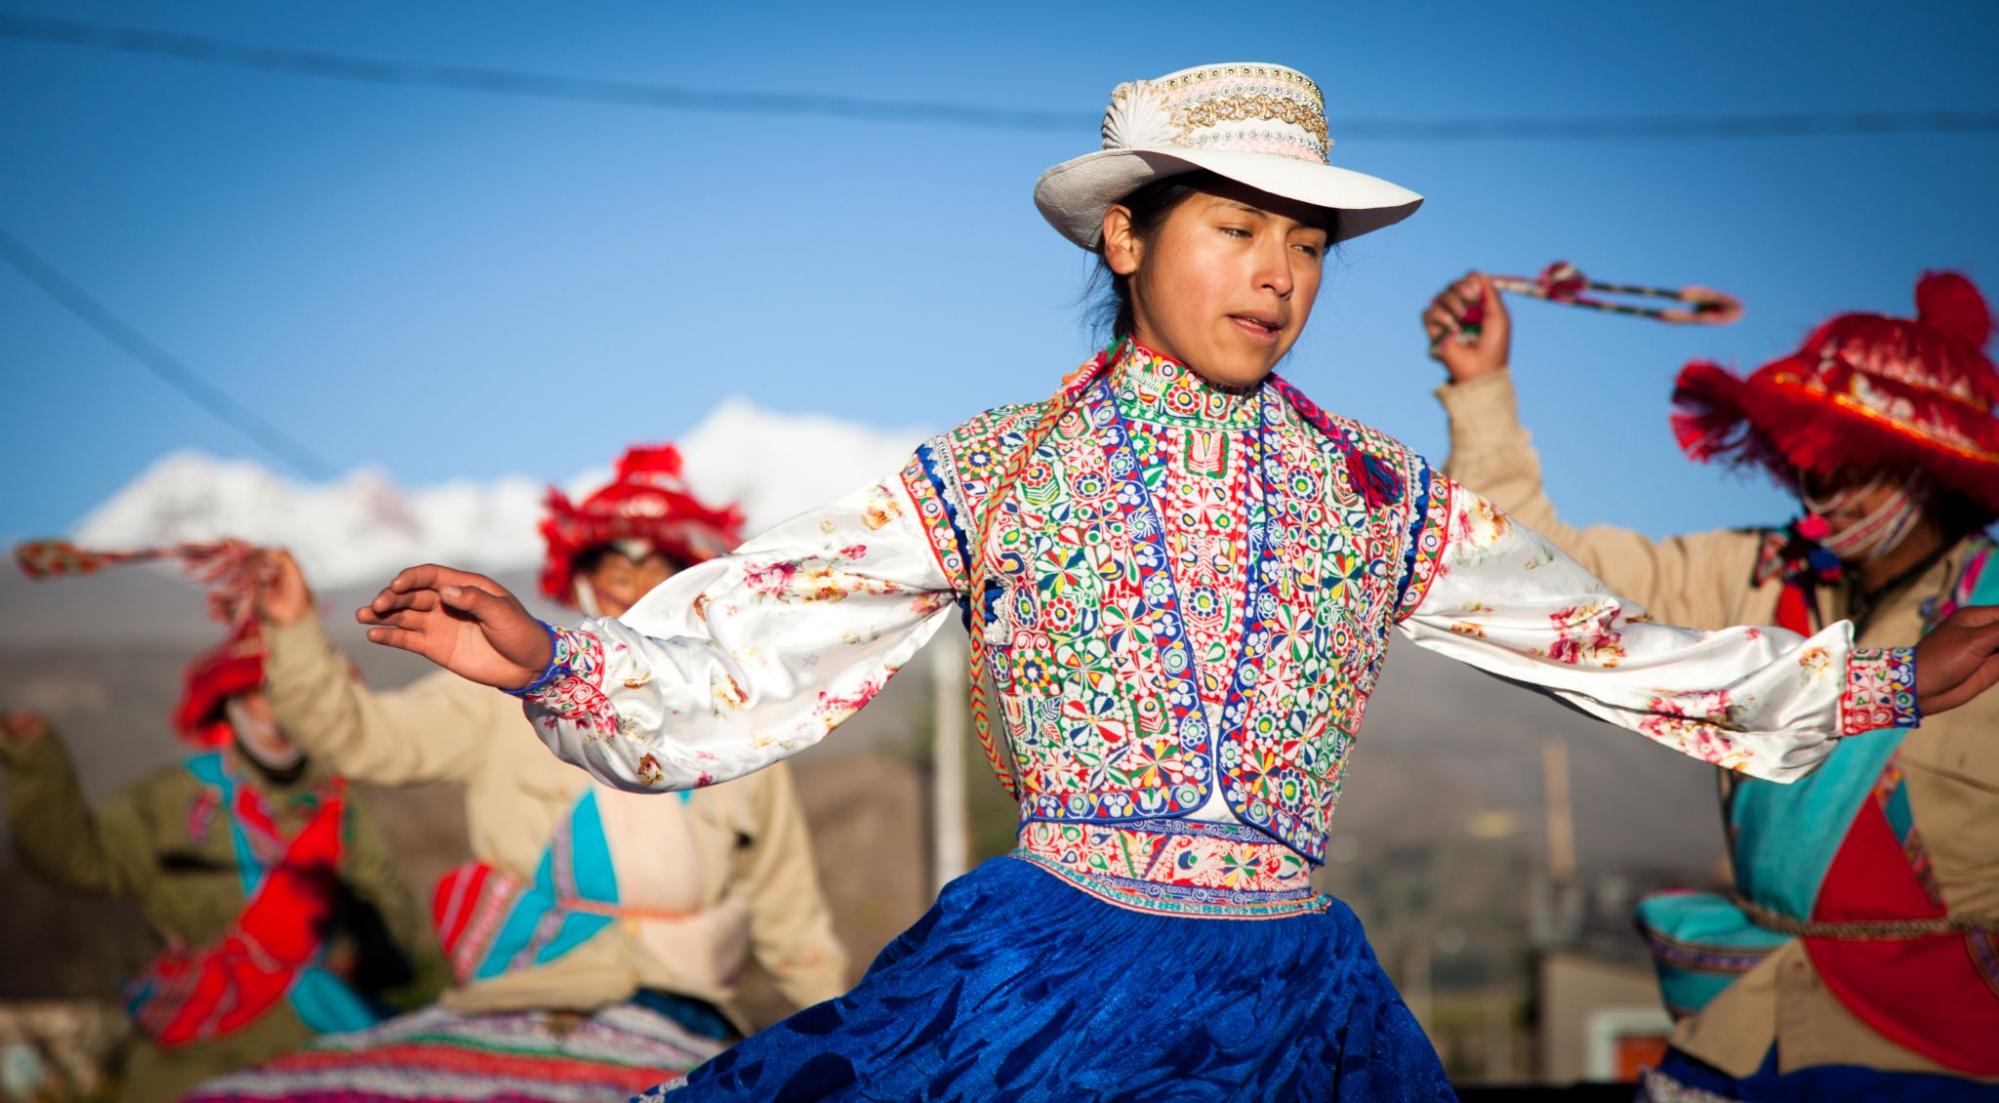 A female Peruvian dancer has arms raised to her sides in mid-dance.